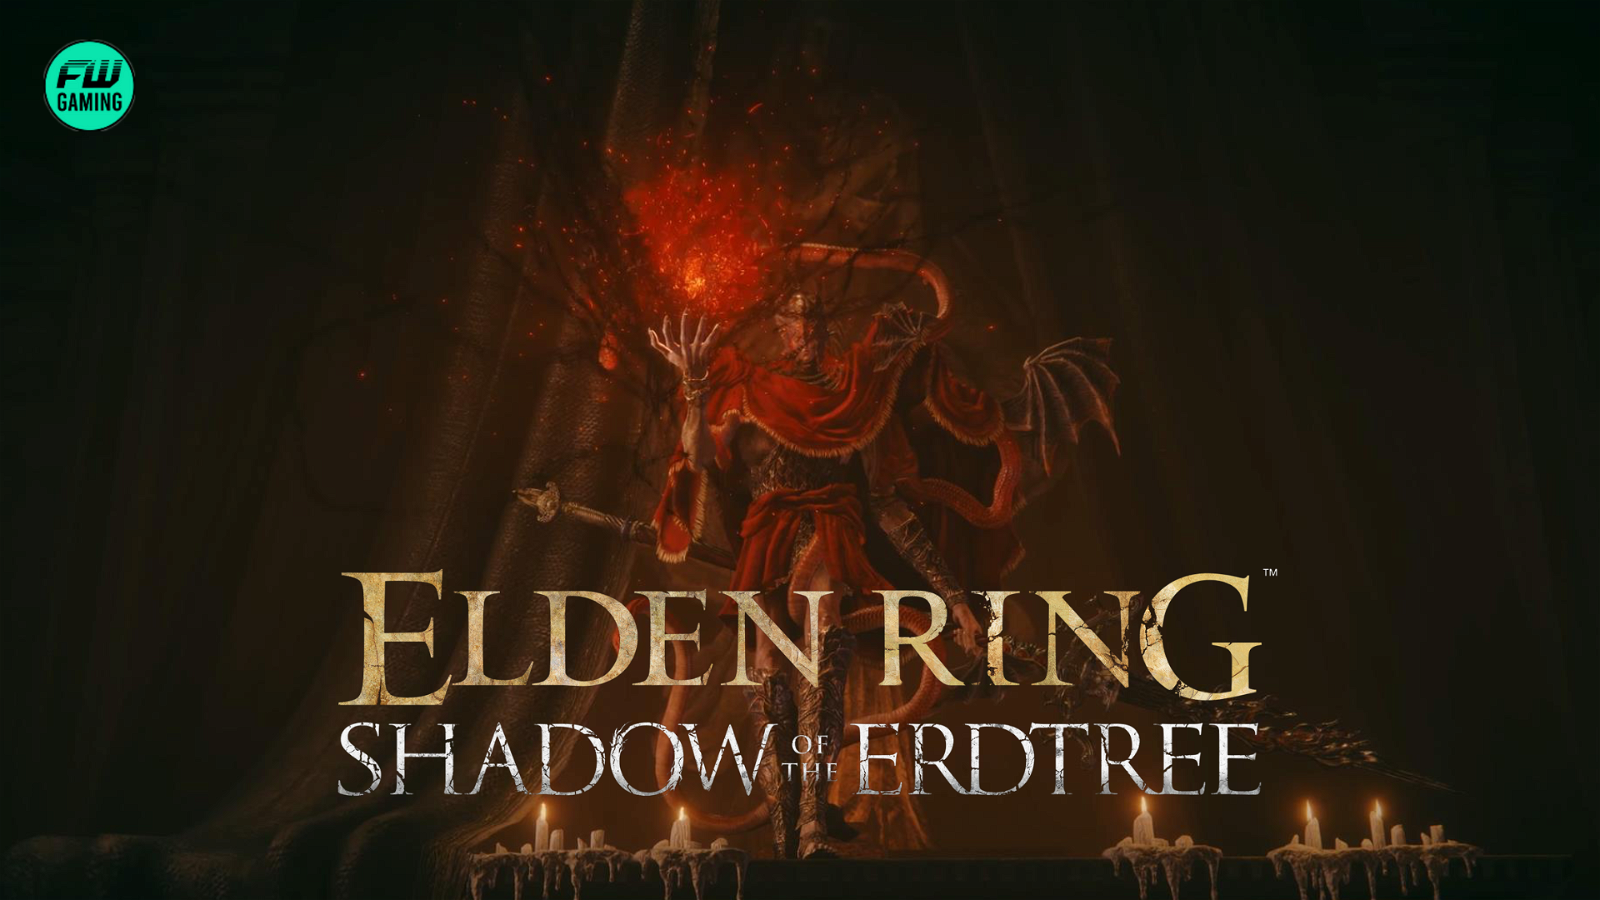 Have We Already Fought Elden Ring DLC Shadow of the Erdtree's Messmer Before?